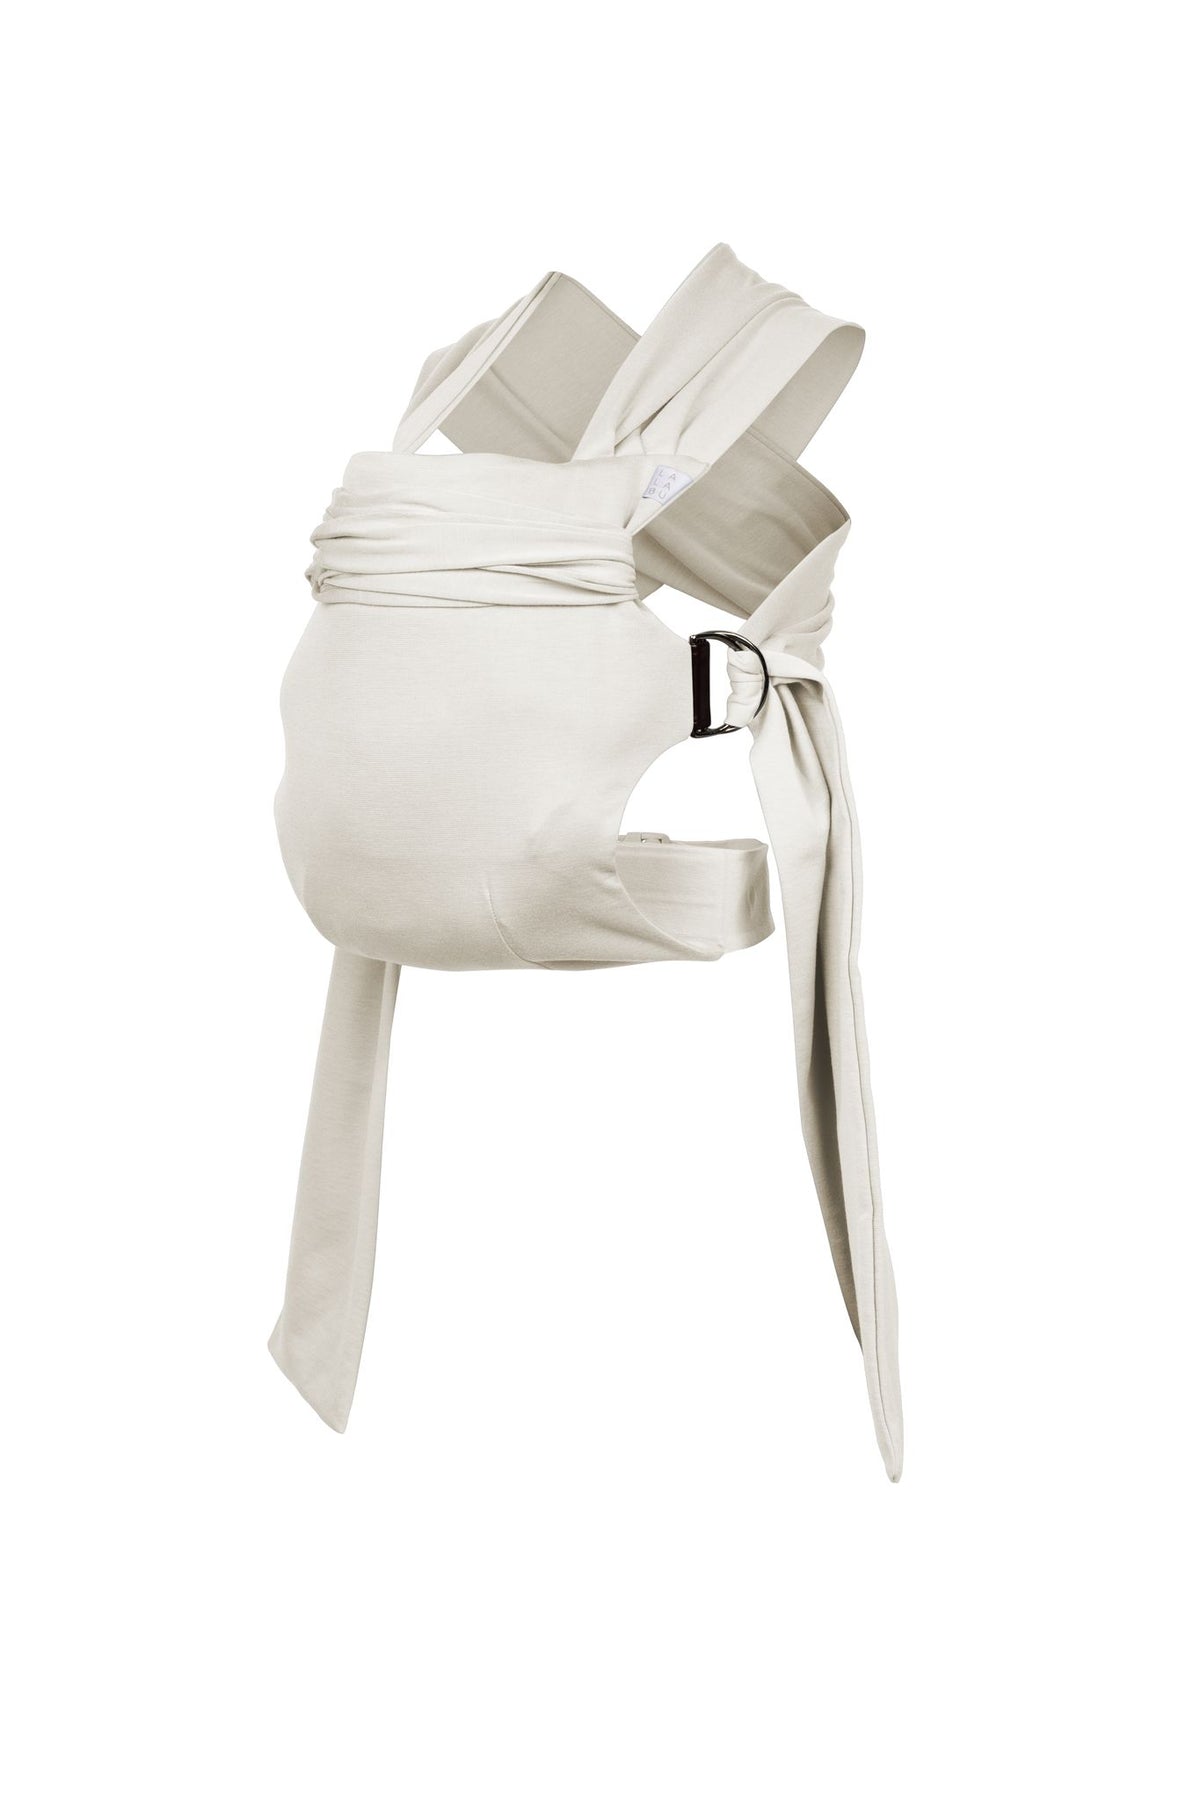 Simple Wrap carrier, with buckle waist belt and rings to attach fabric straps, in Natural.